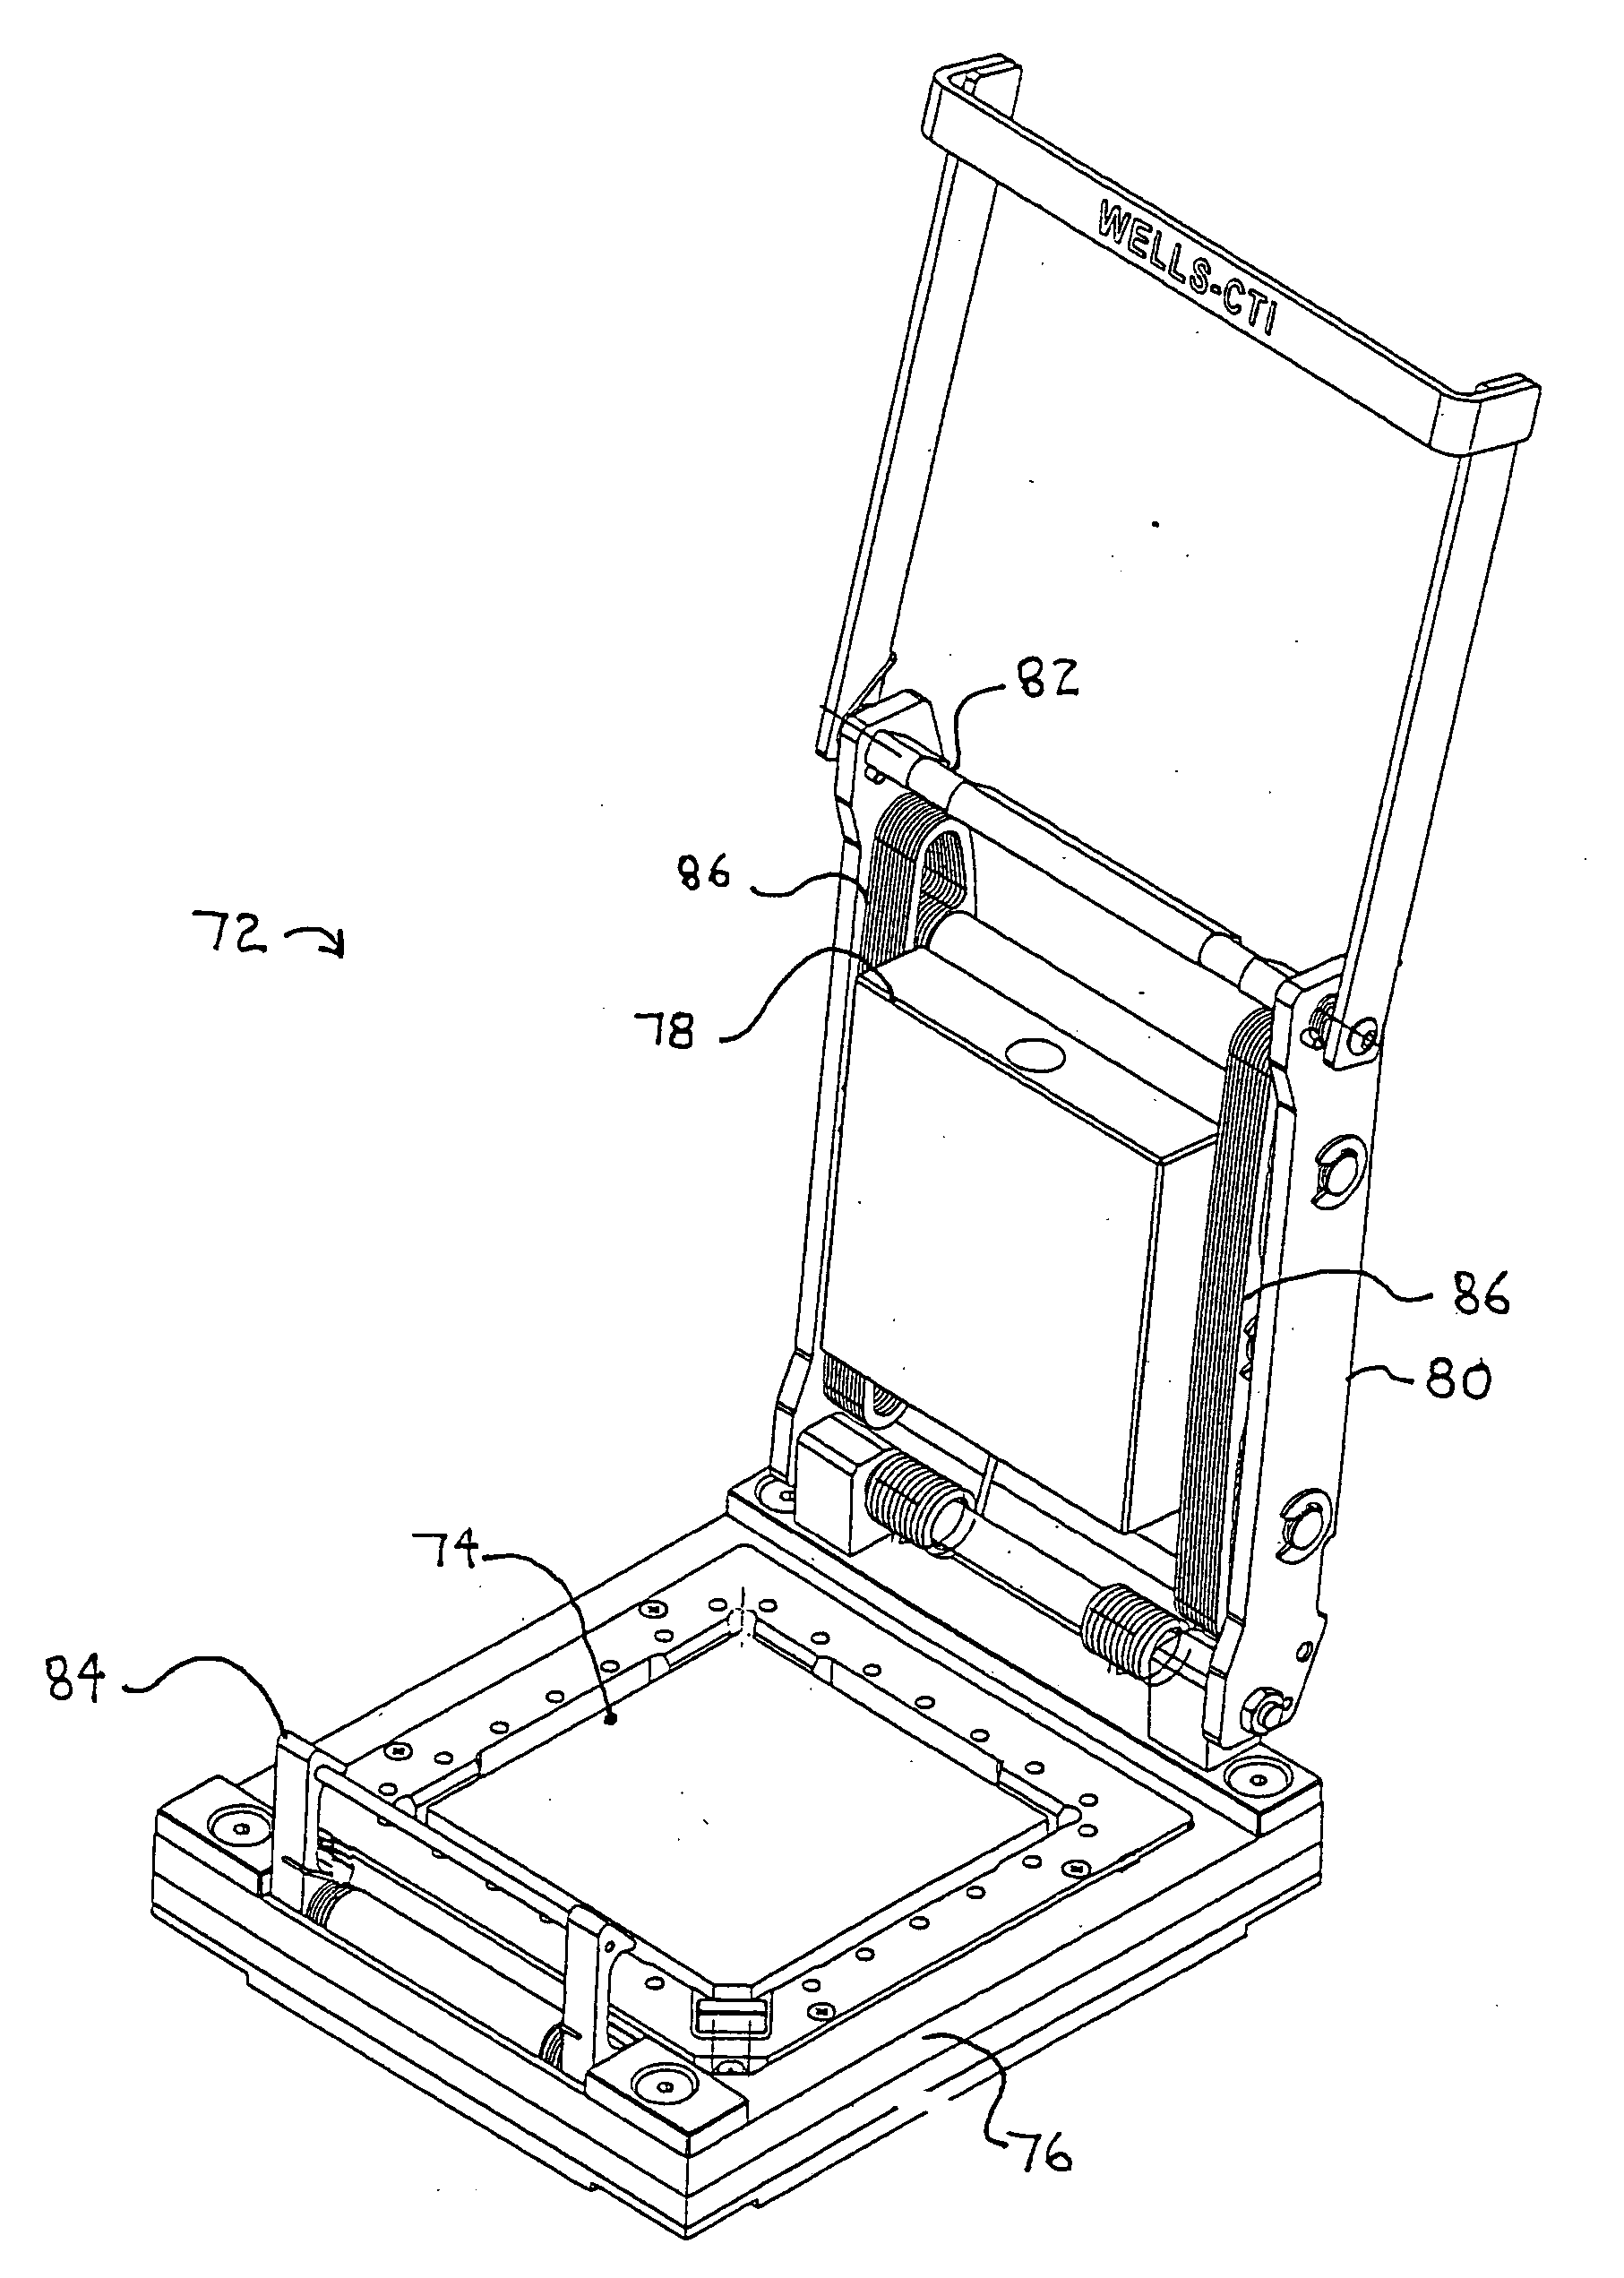 Integrated circuit package testing device and method